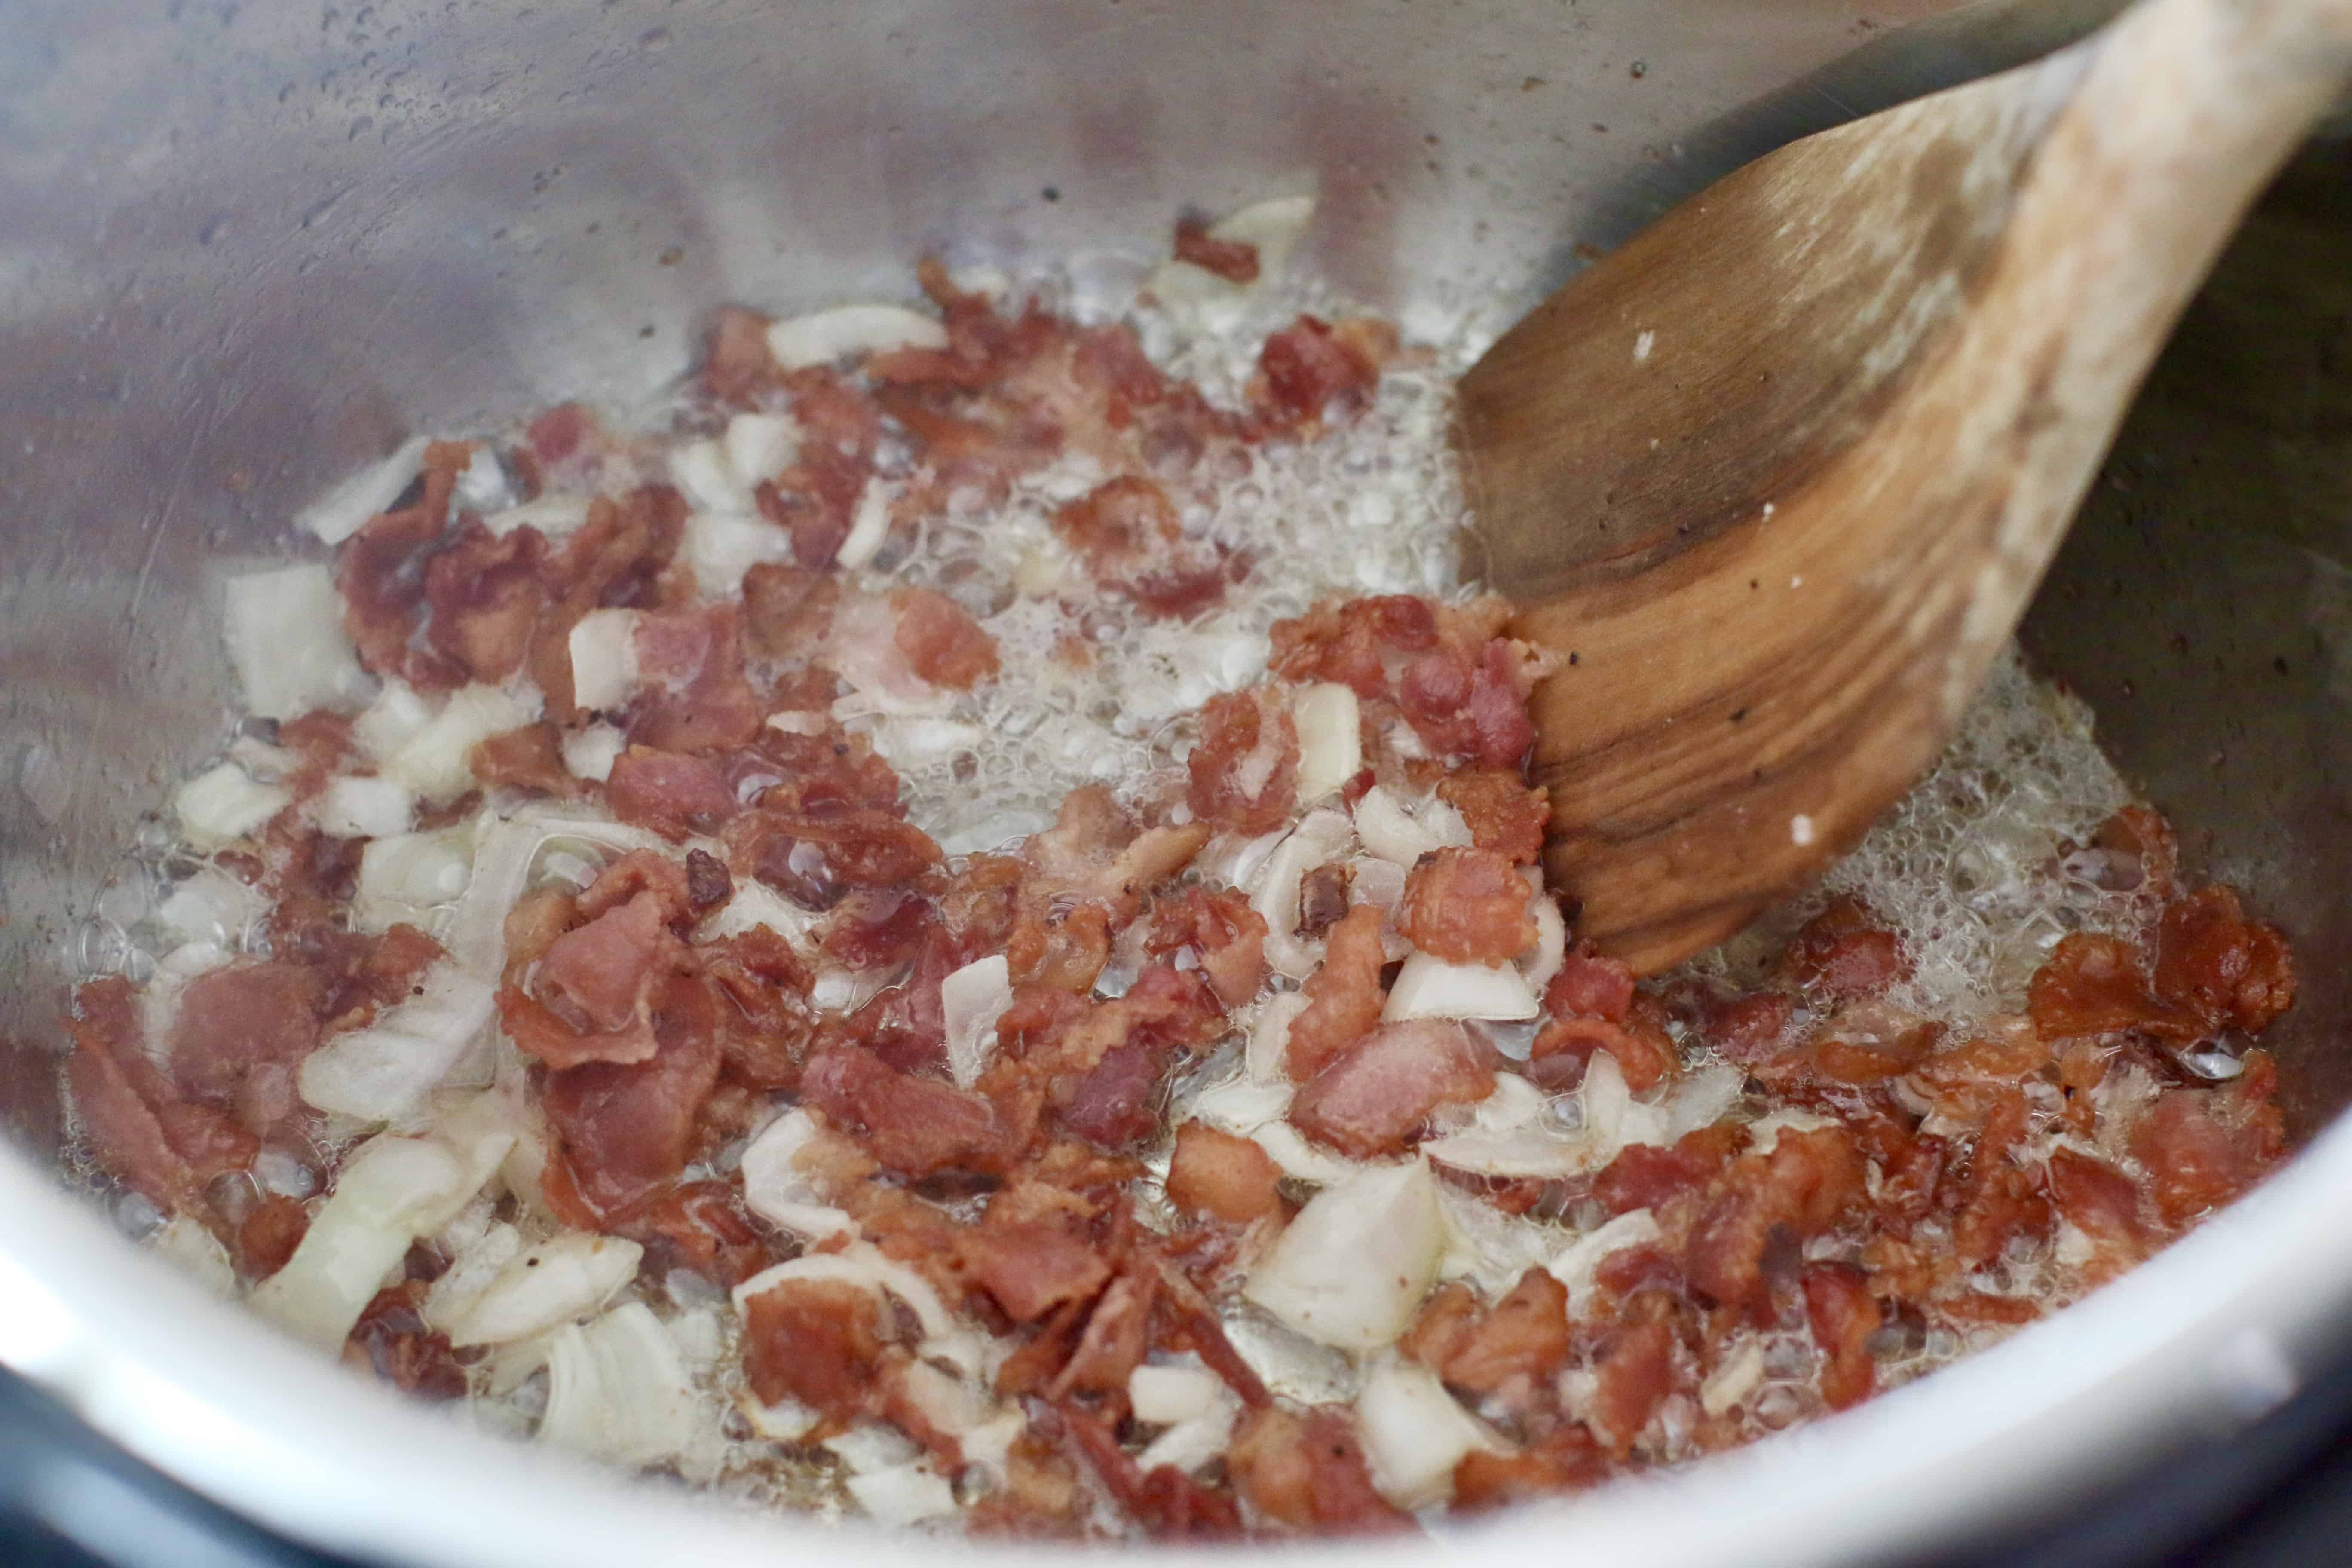 diced shallot added to cooked bacon in pressure cooker pot.